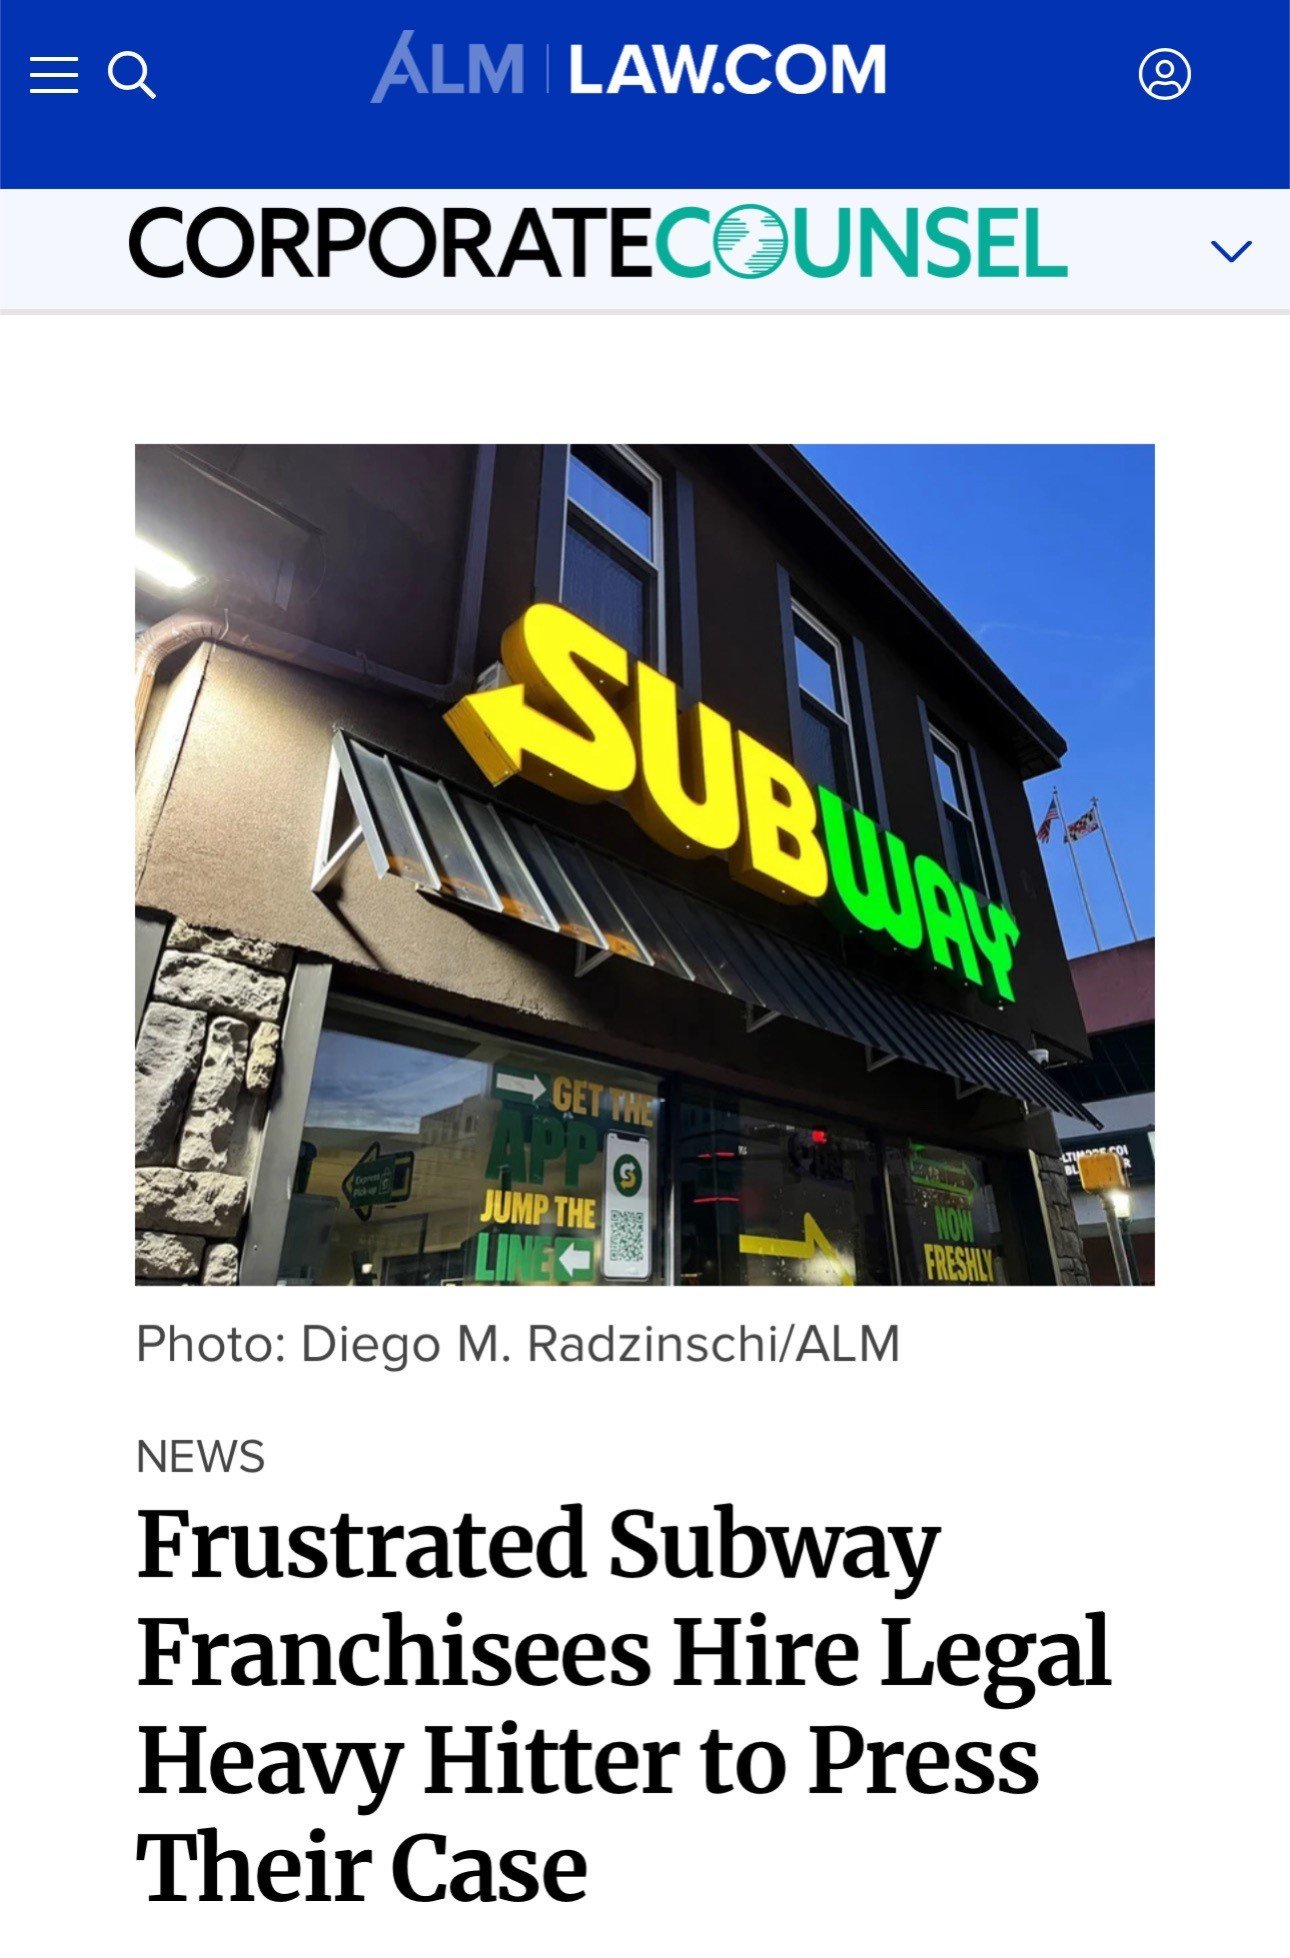 Frustrated Subway Franchisees hire leagal heavy hitter to press their case